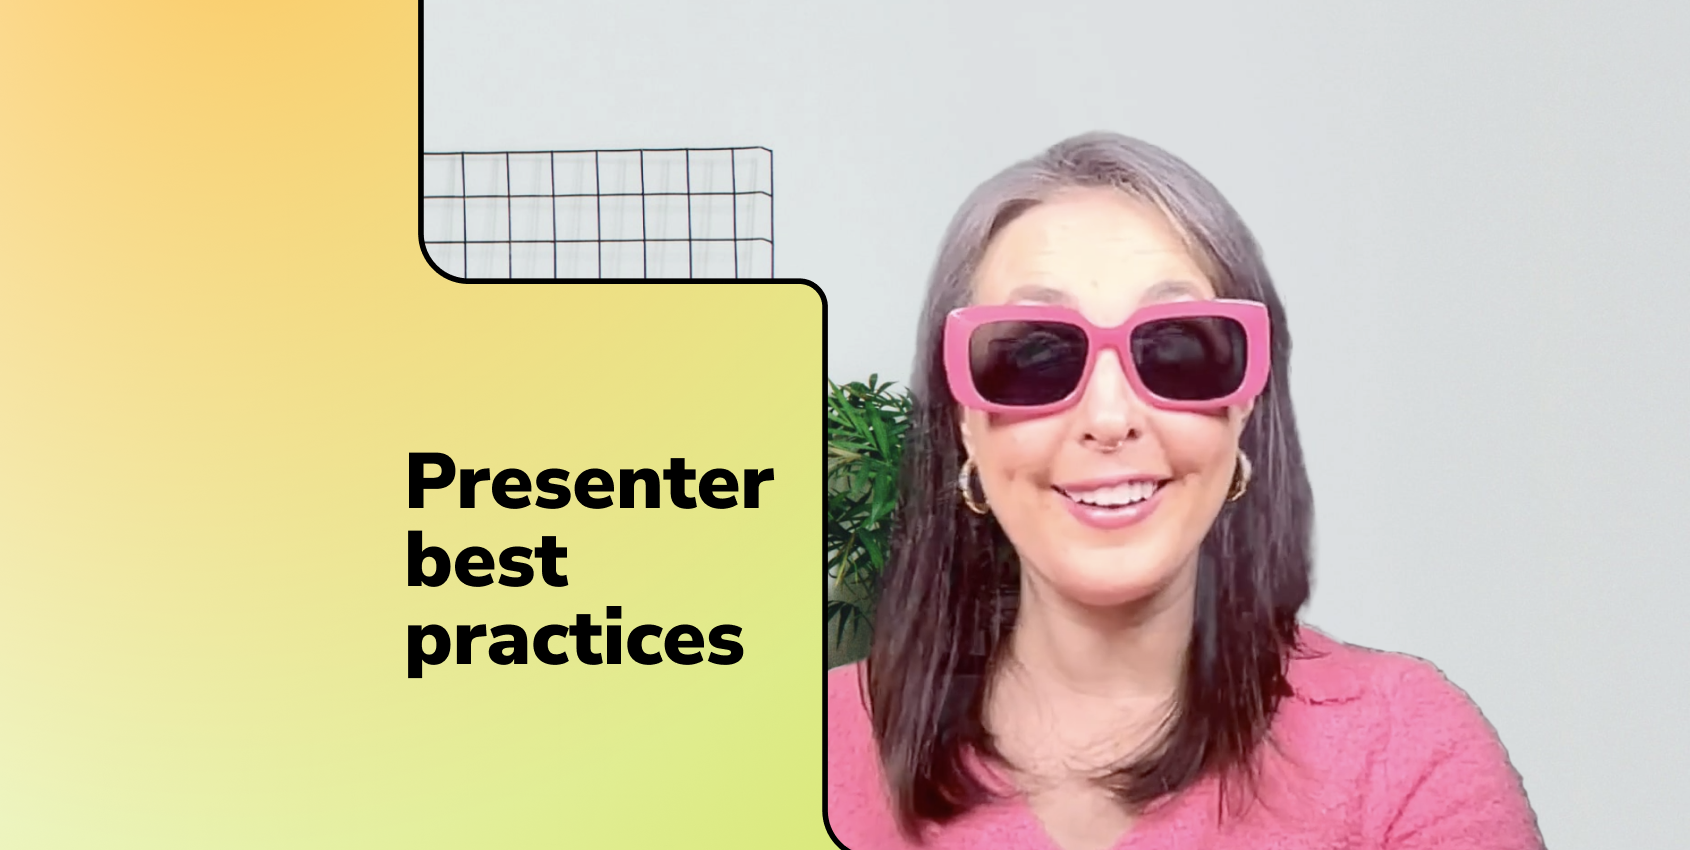 Person wearing sunglasses with "Presenter best practices"" text